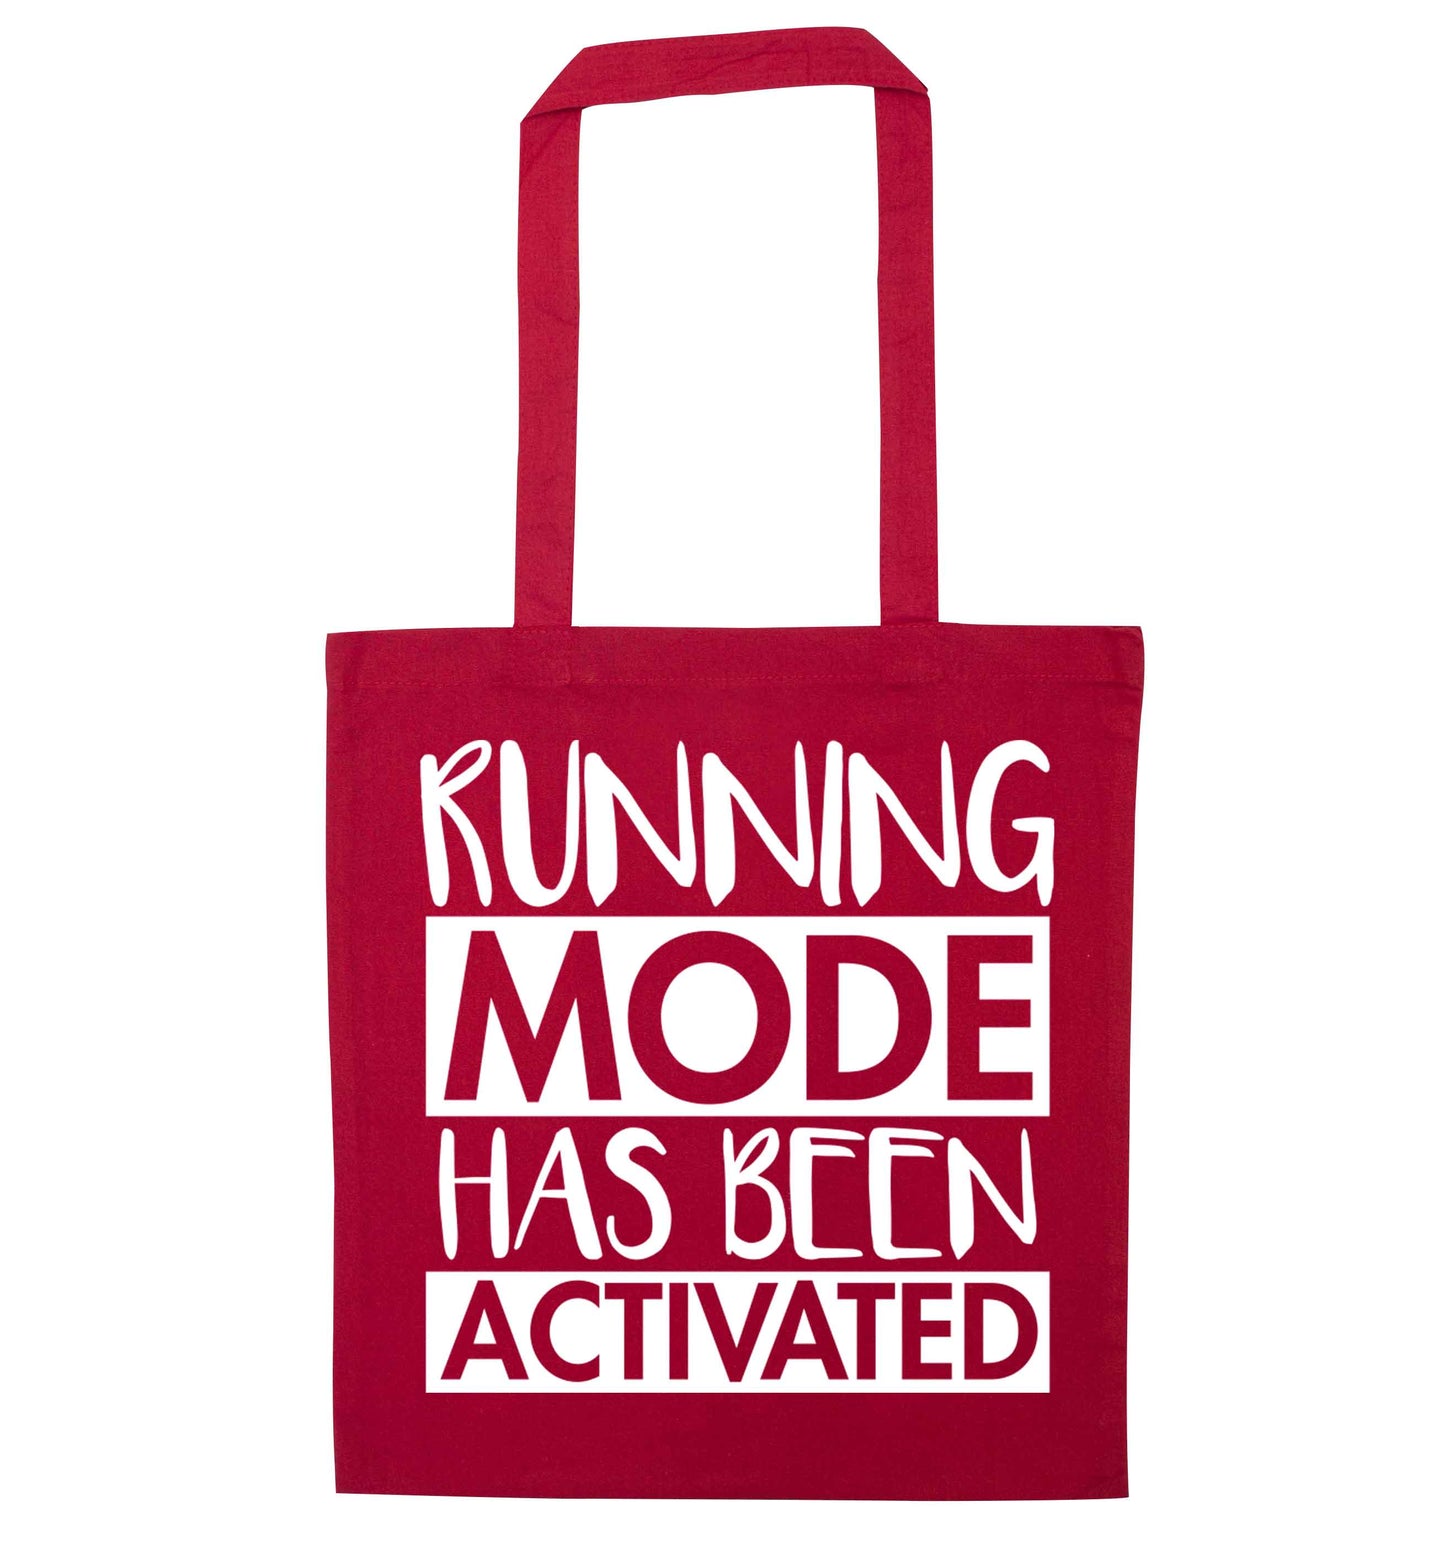 Running mode has been activated red tote bag